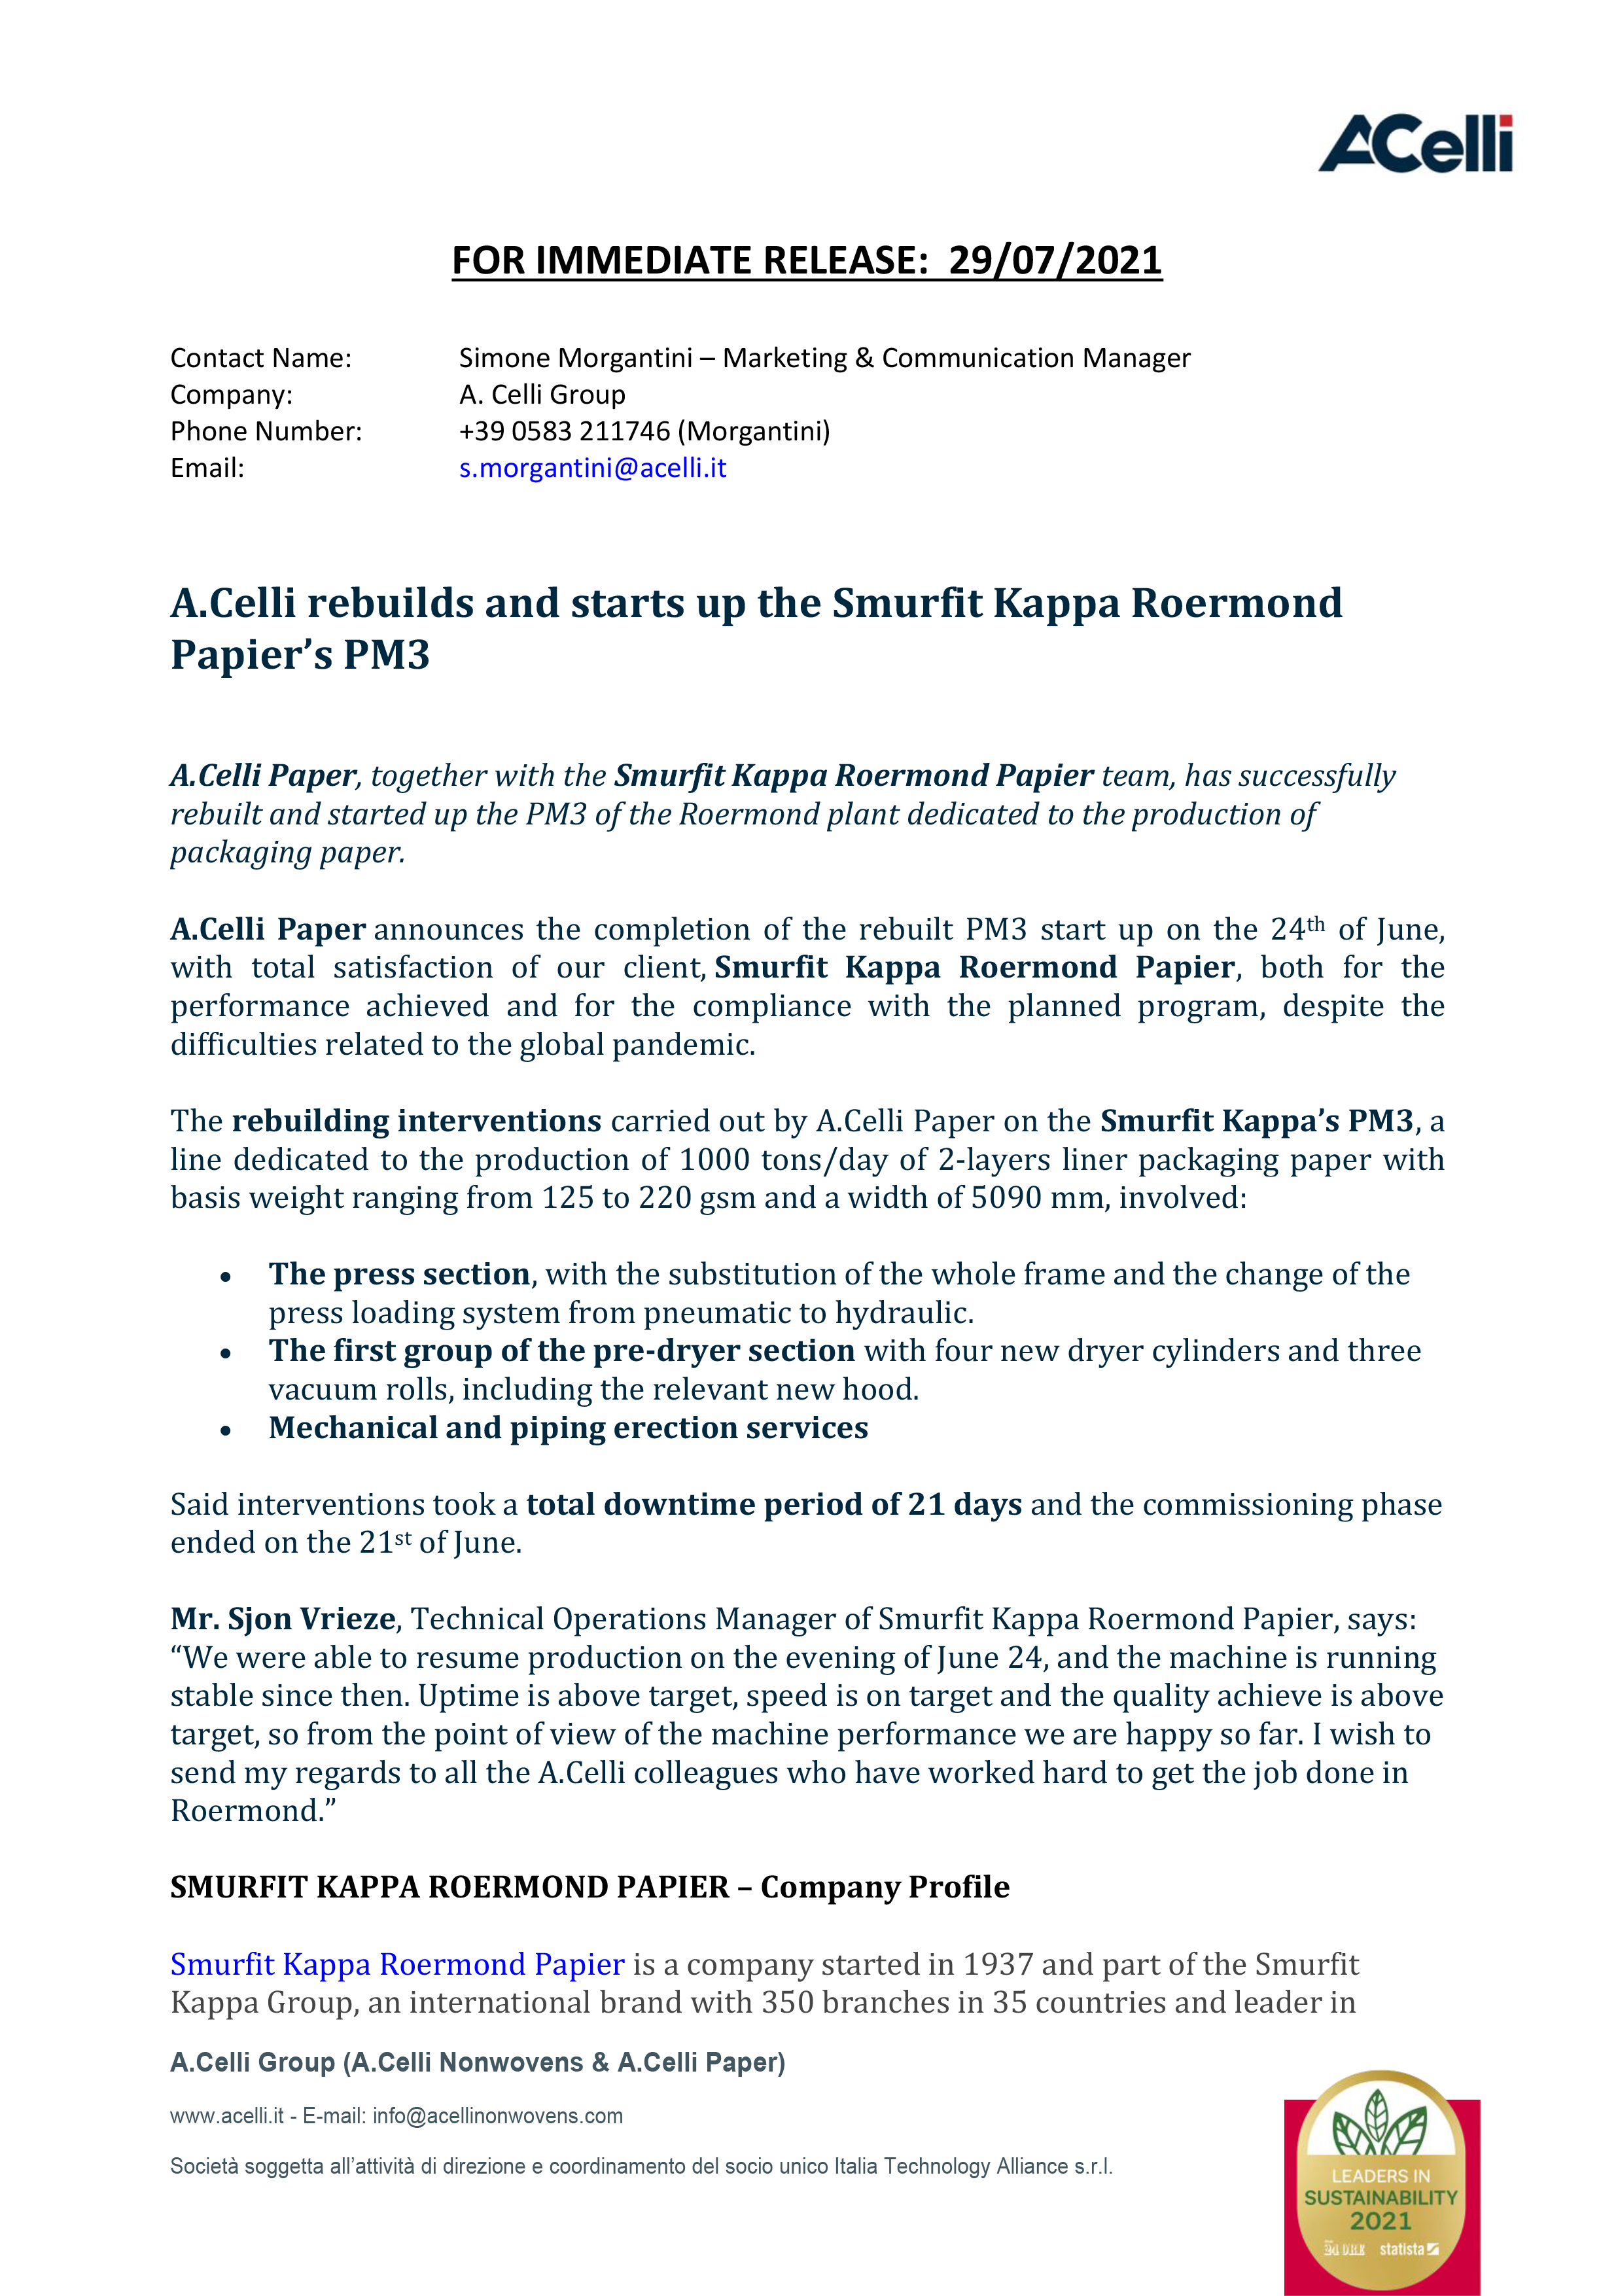 A.Celli rebuilds and starts up the Smurfit Kappa Roermond  Papier’s PM3